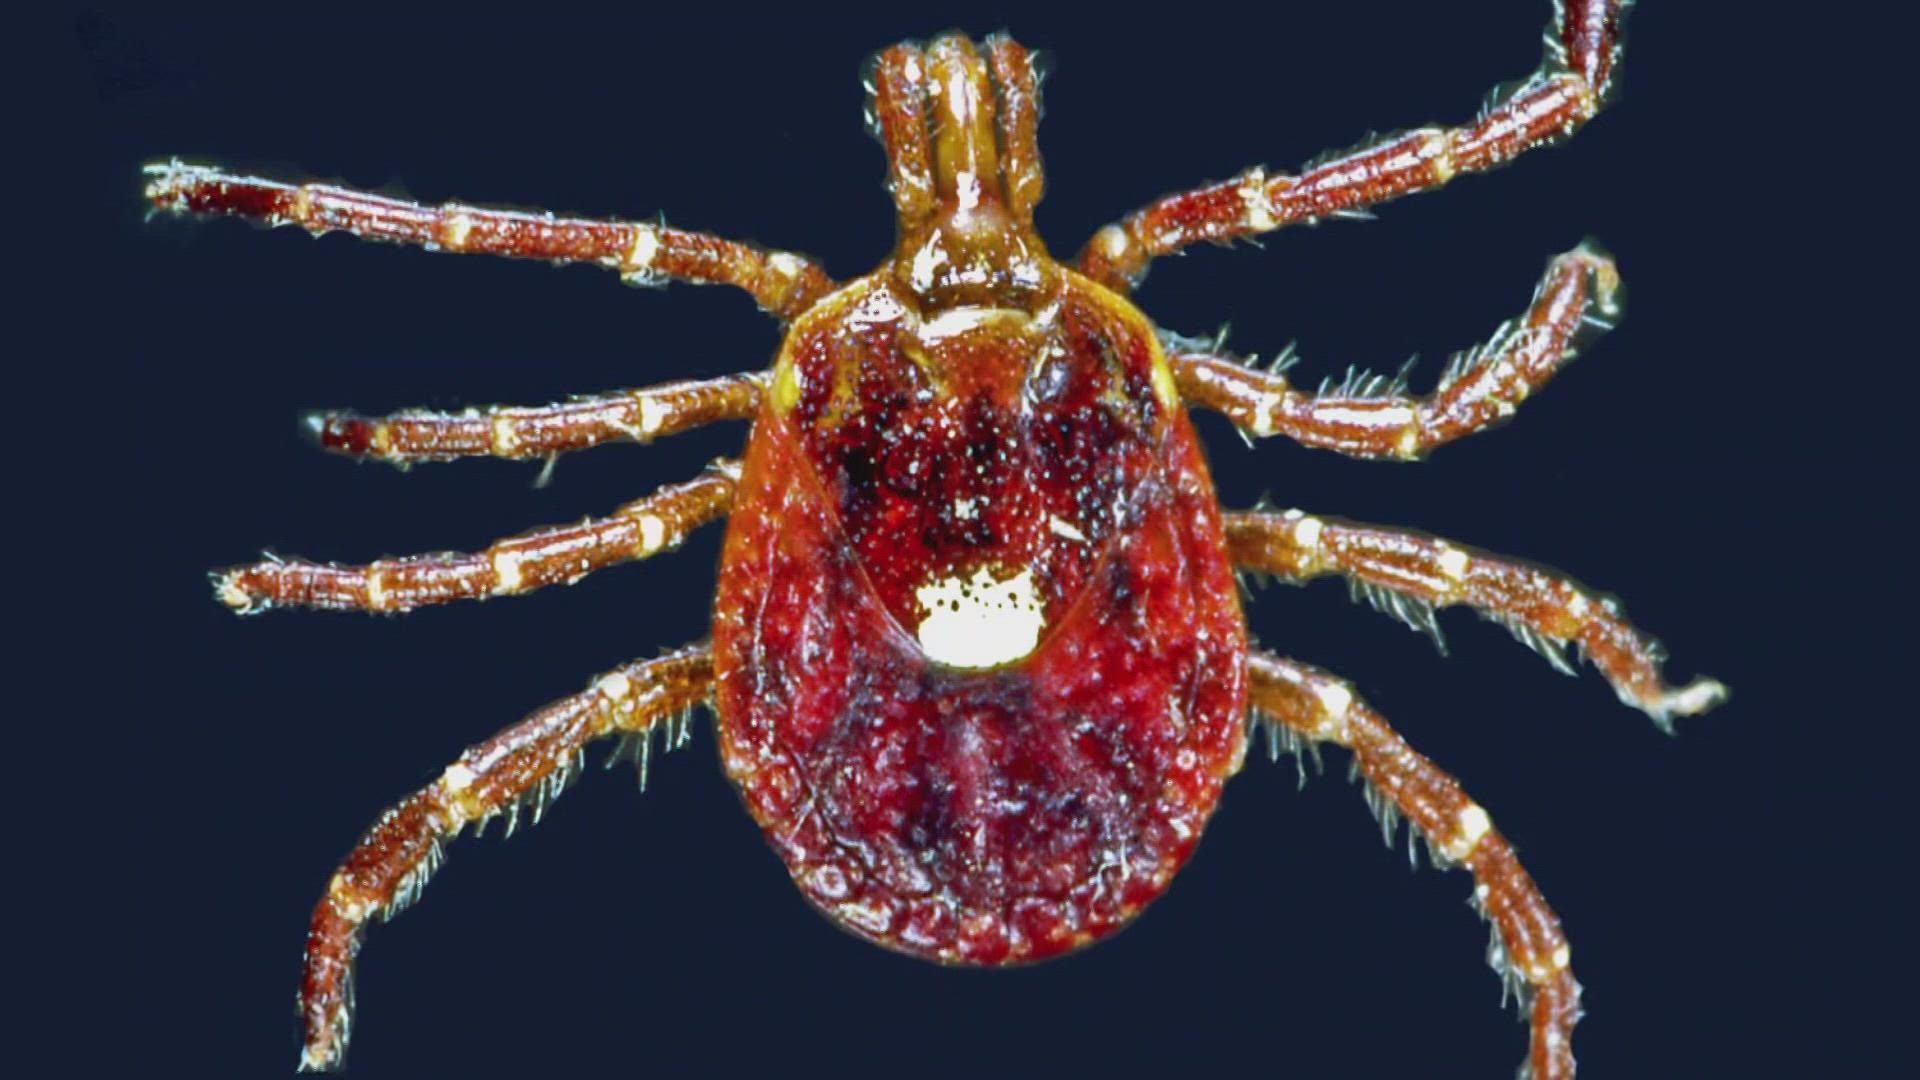 Trigged by a bite from the Lone star tick, AGS can cause allergies to meat, including beef, pork, and lamb.